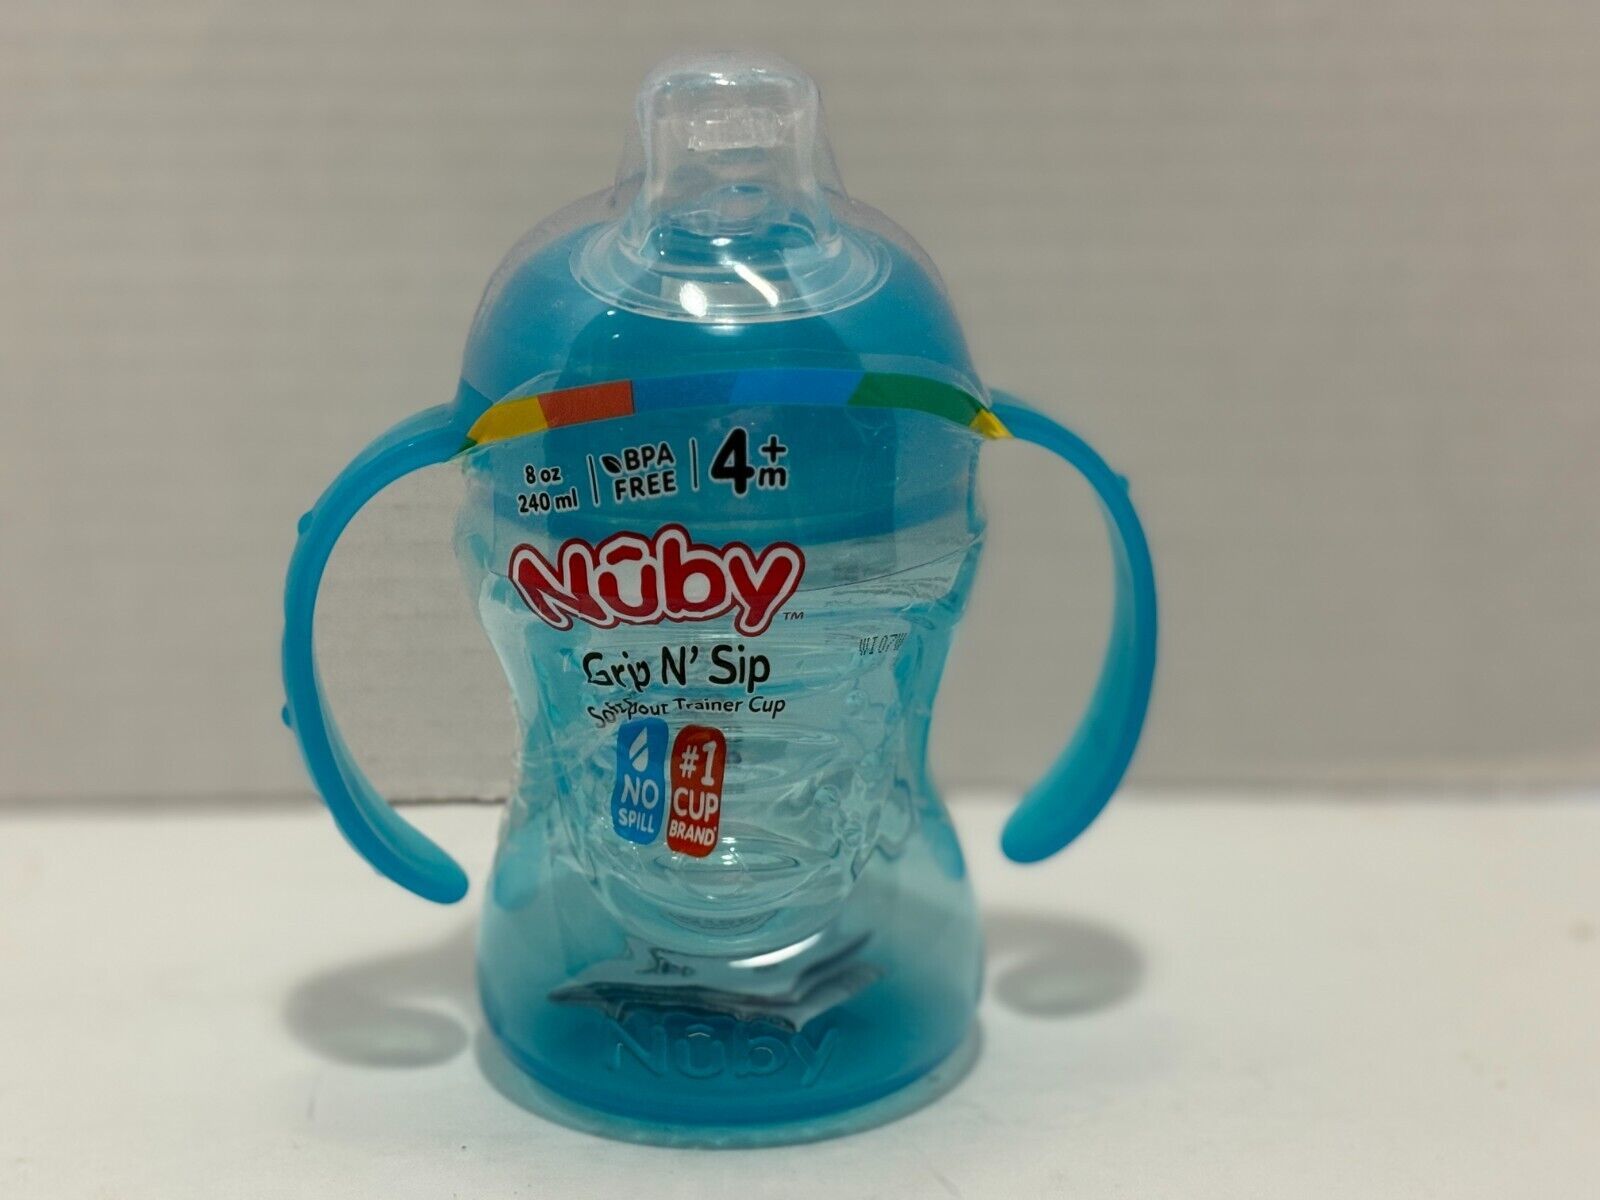 Nuby Grip N' Sip 1st Sipeez Sippy Cup - Easy-to-Hold Handle - No Spill -BPA Free - $6.44